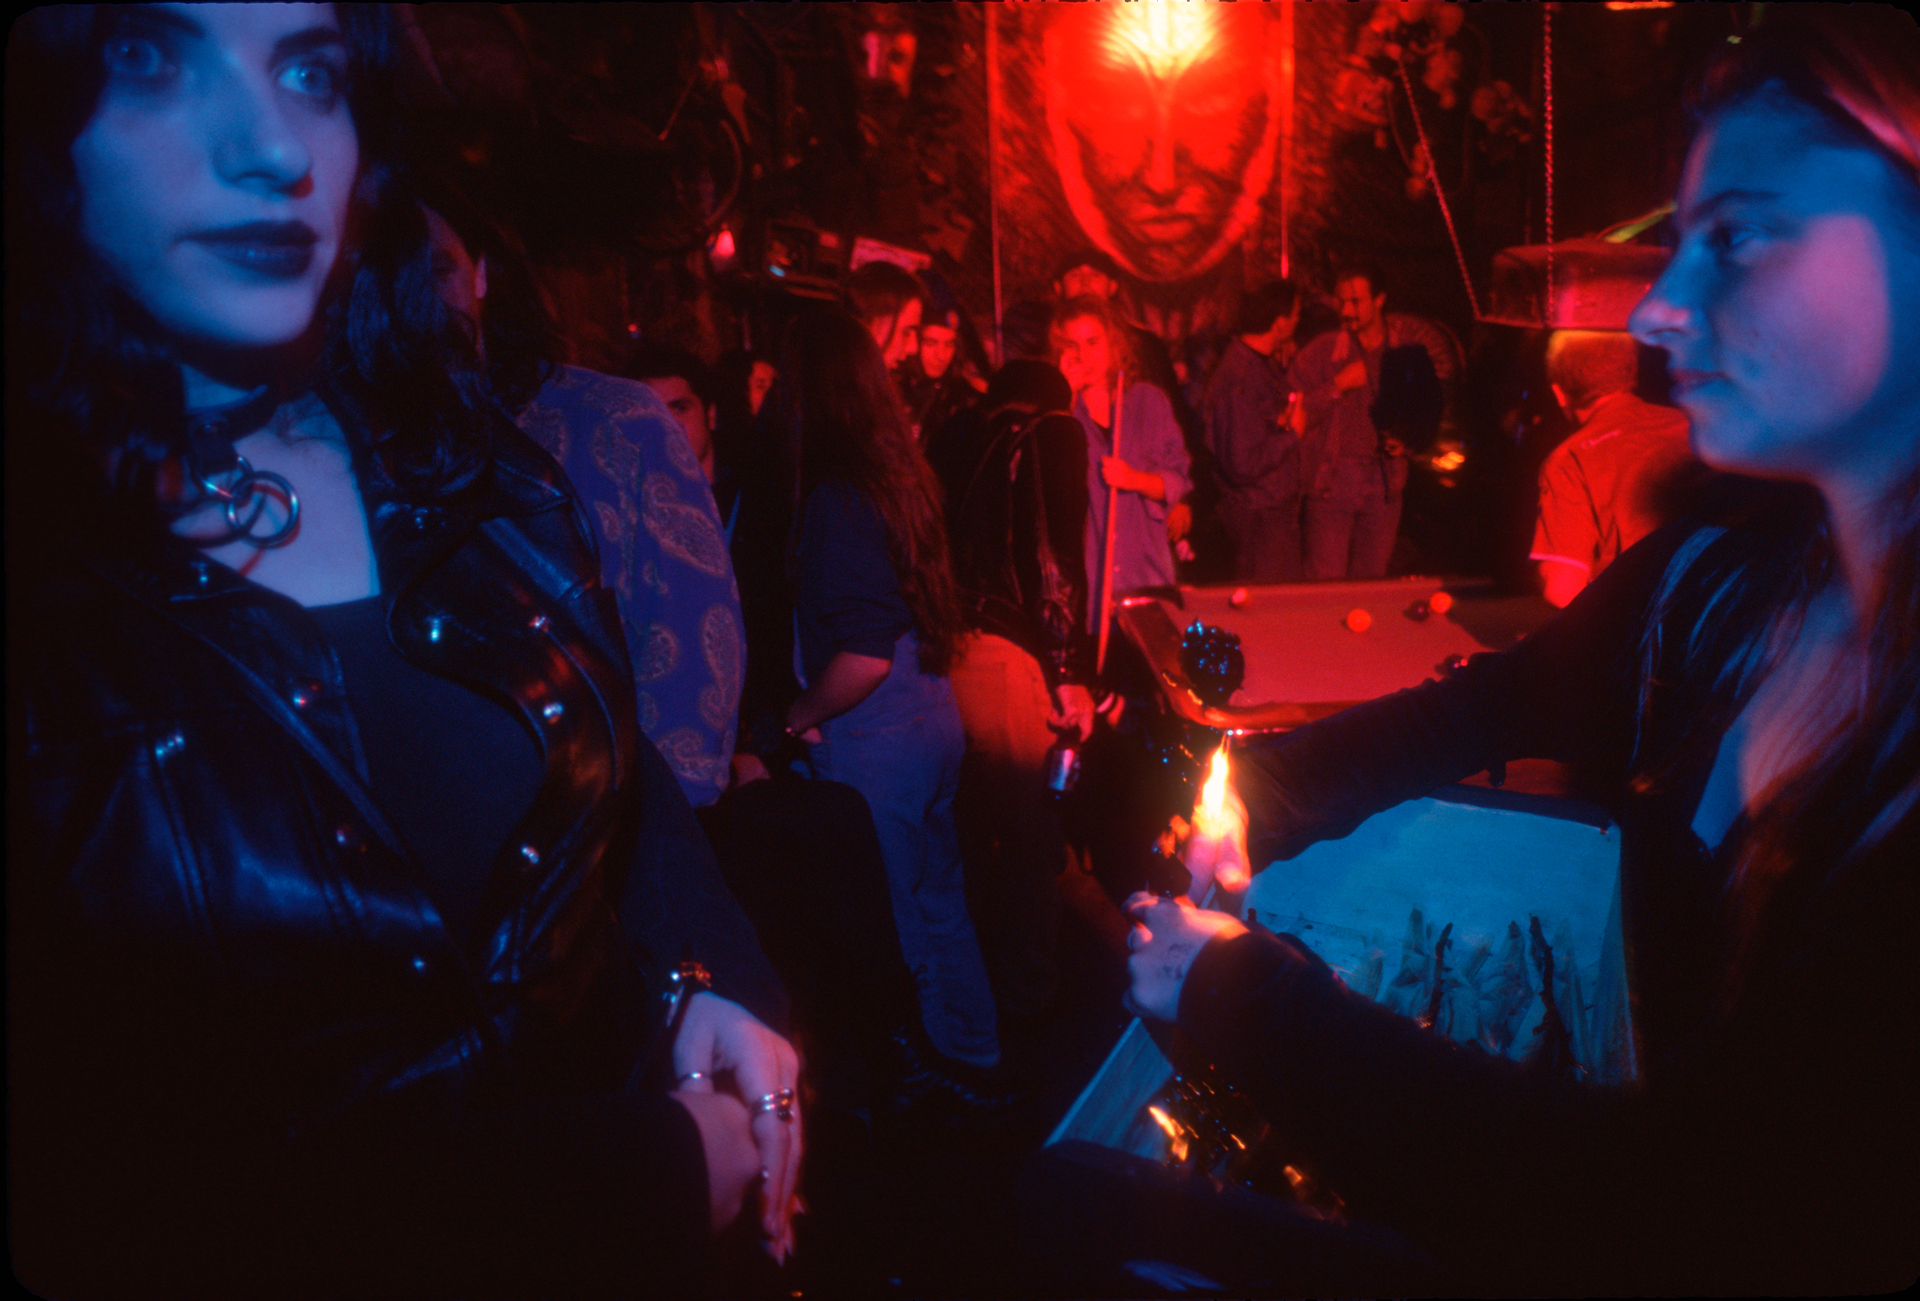  Toronto’s nightclubs have names such as the Vampire Sex Bar, the Savage Garden and Death, reflecting the vibrant underground scene. 